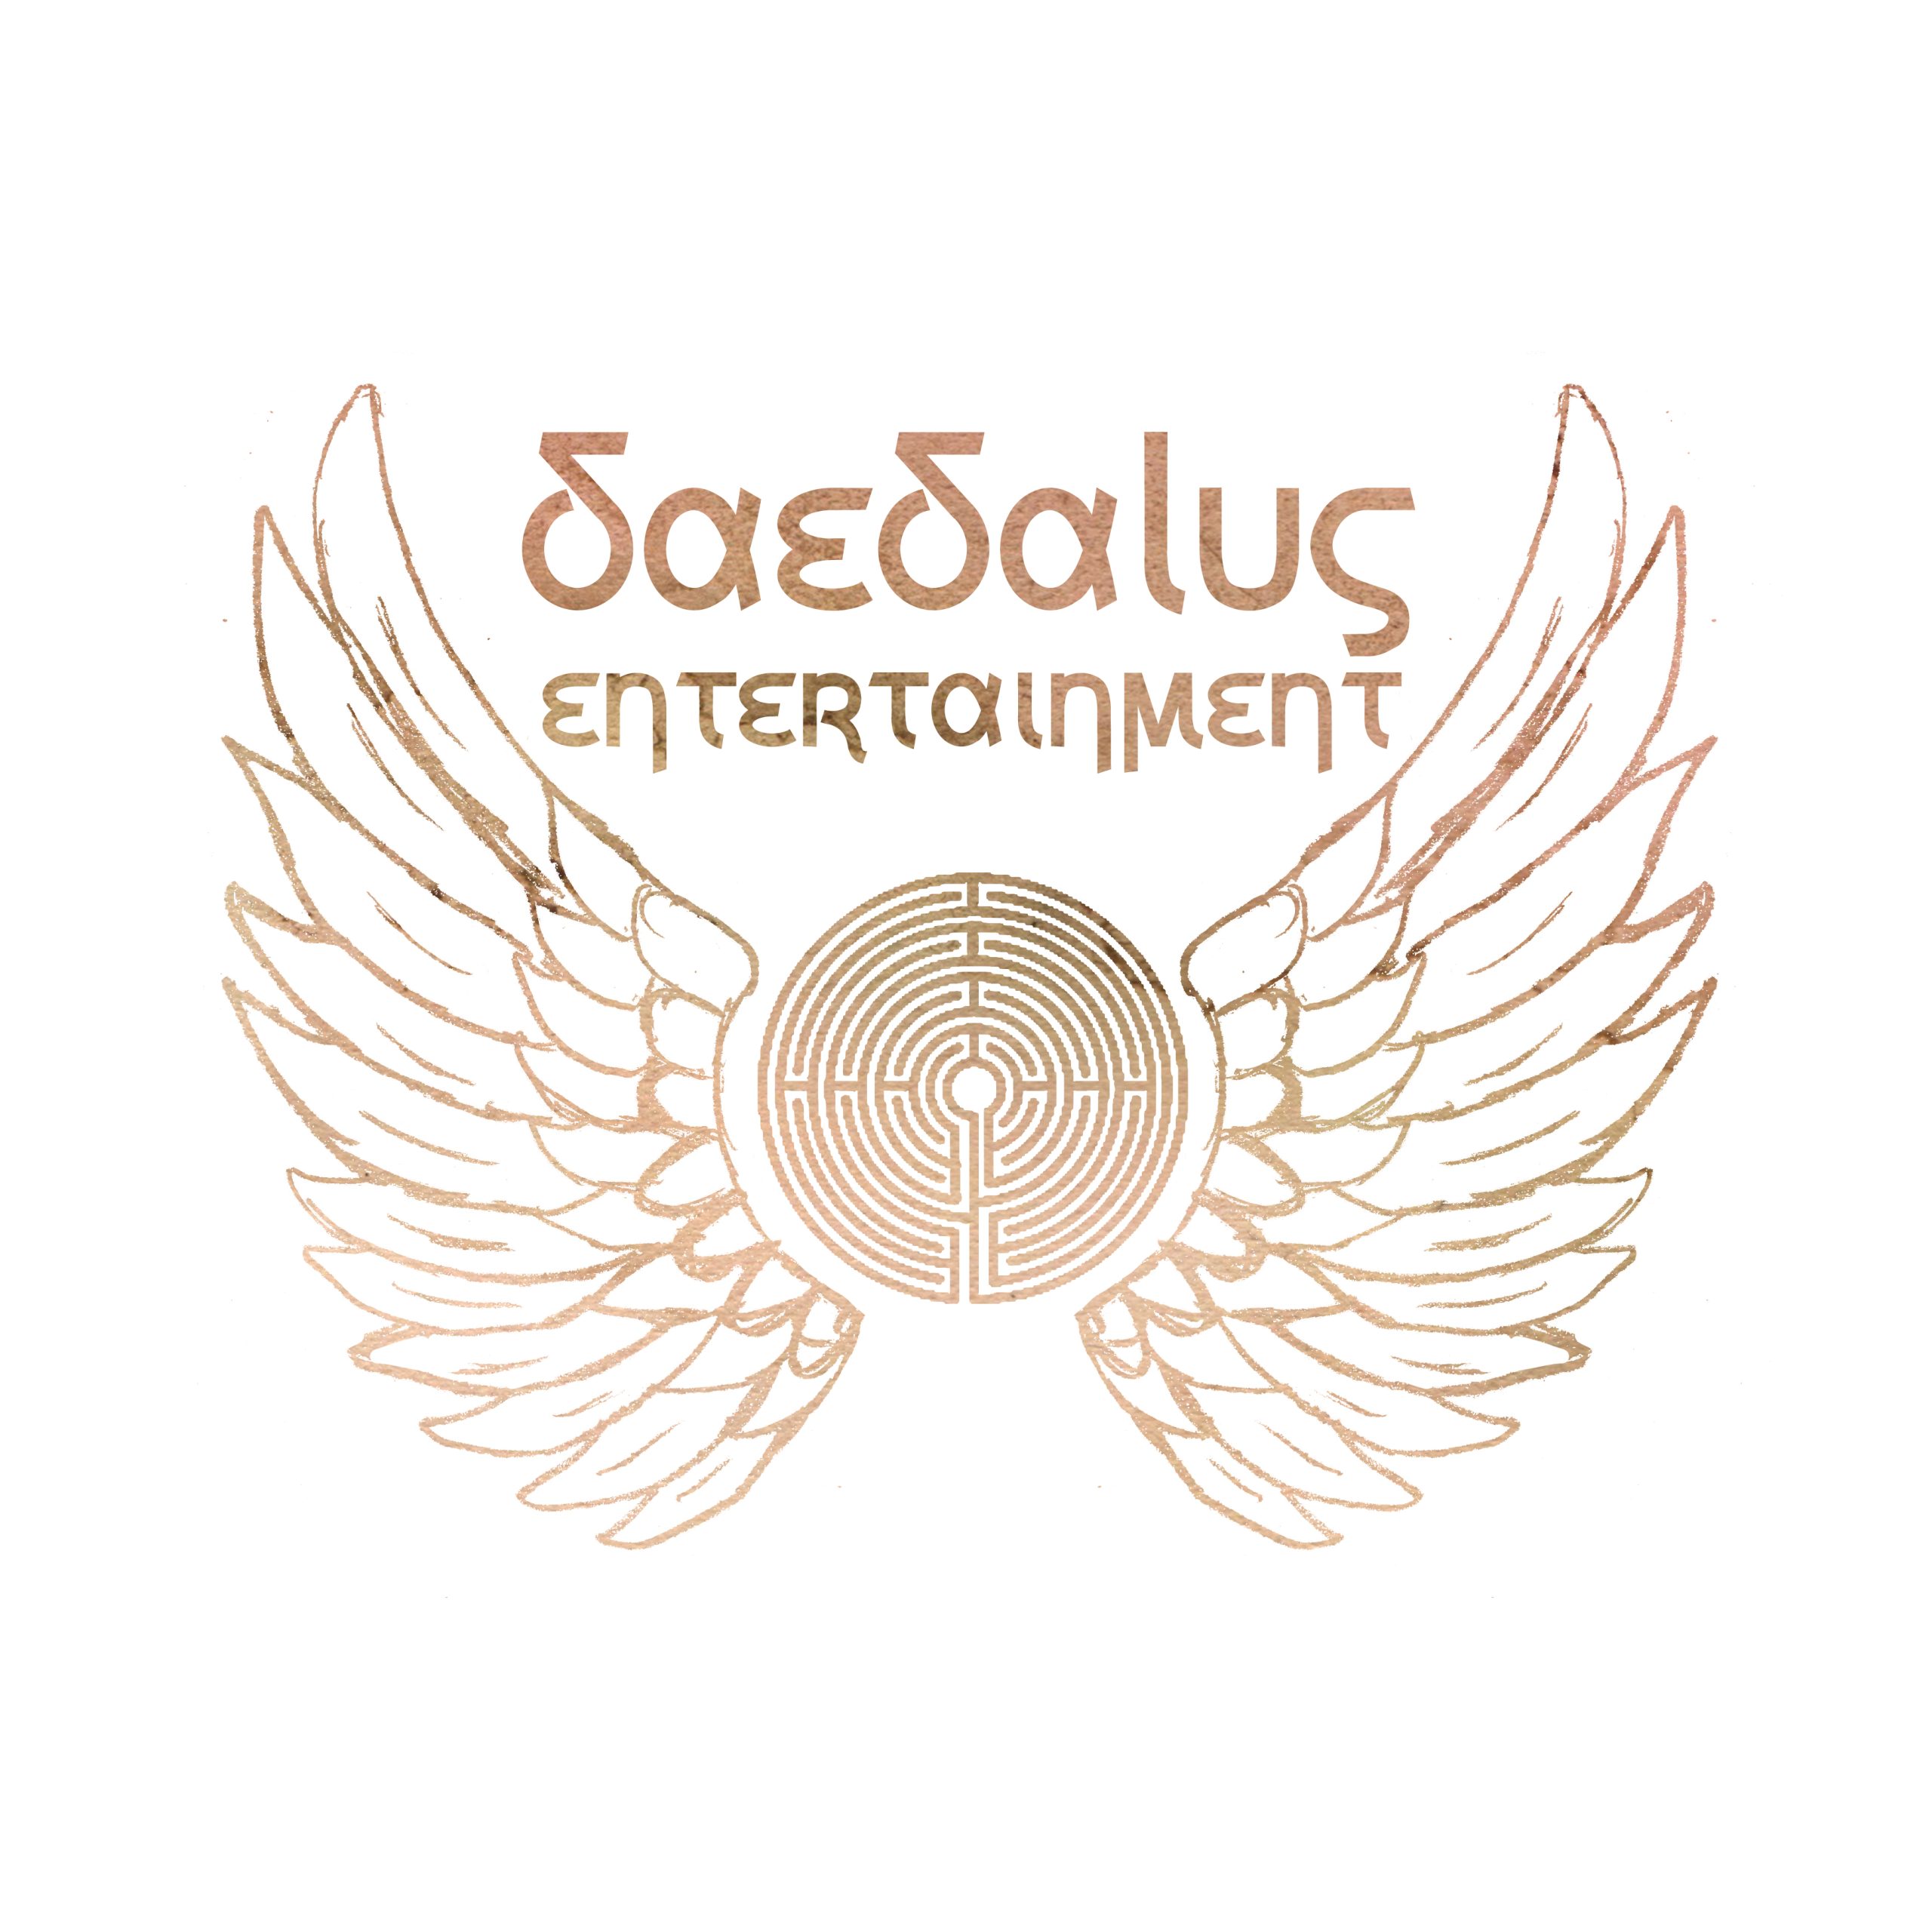 Daedalus Entertainment logo - a circular maze with wings on either side